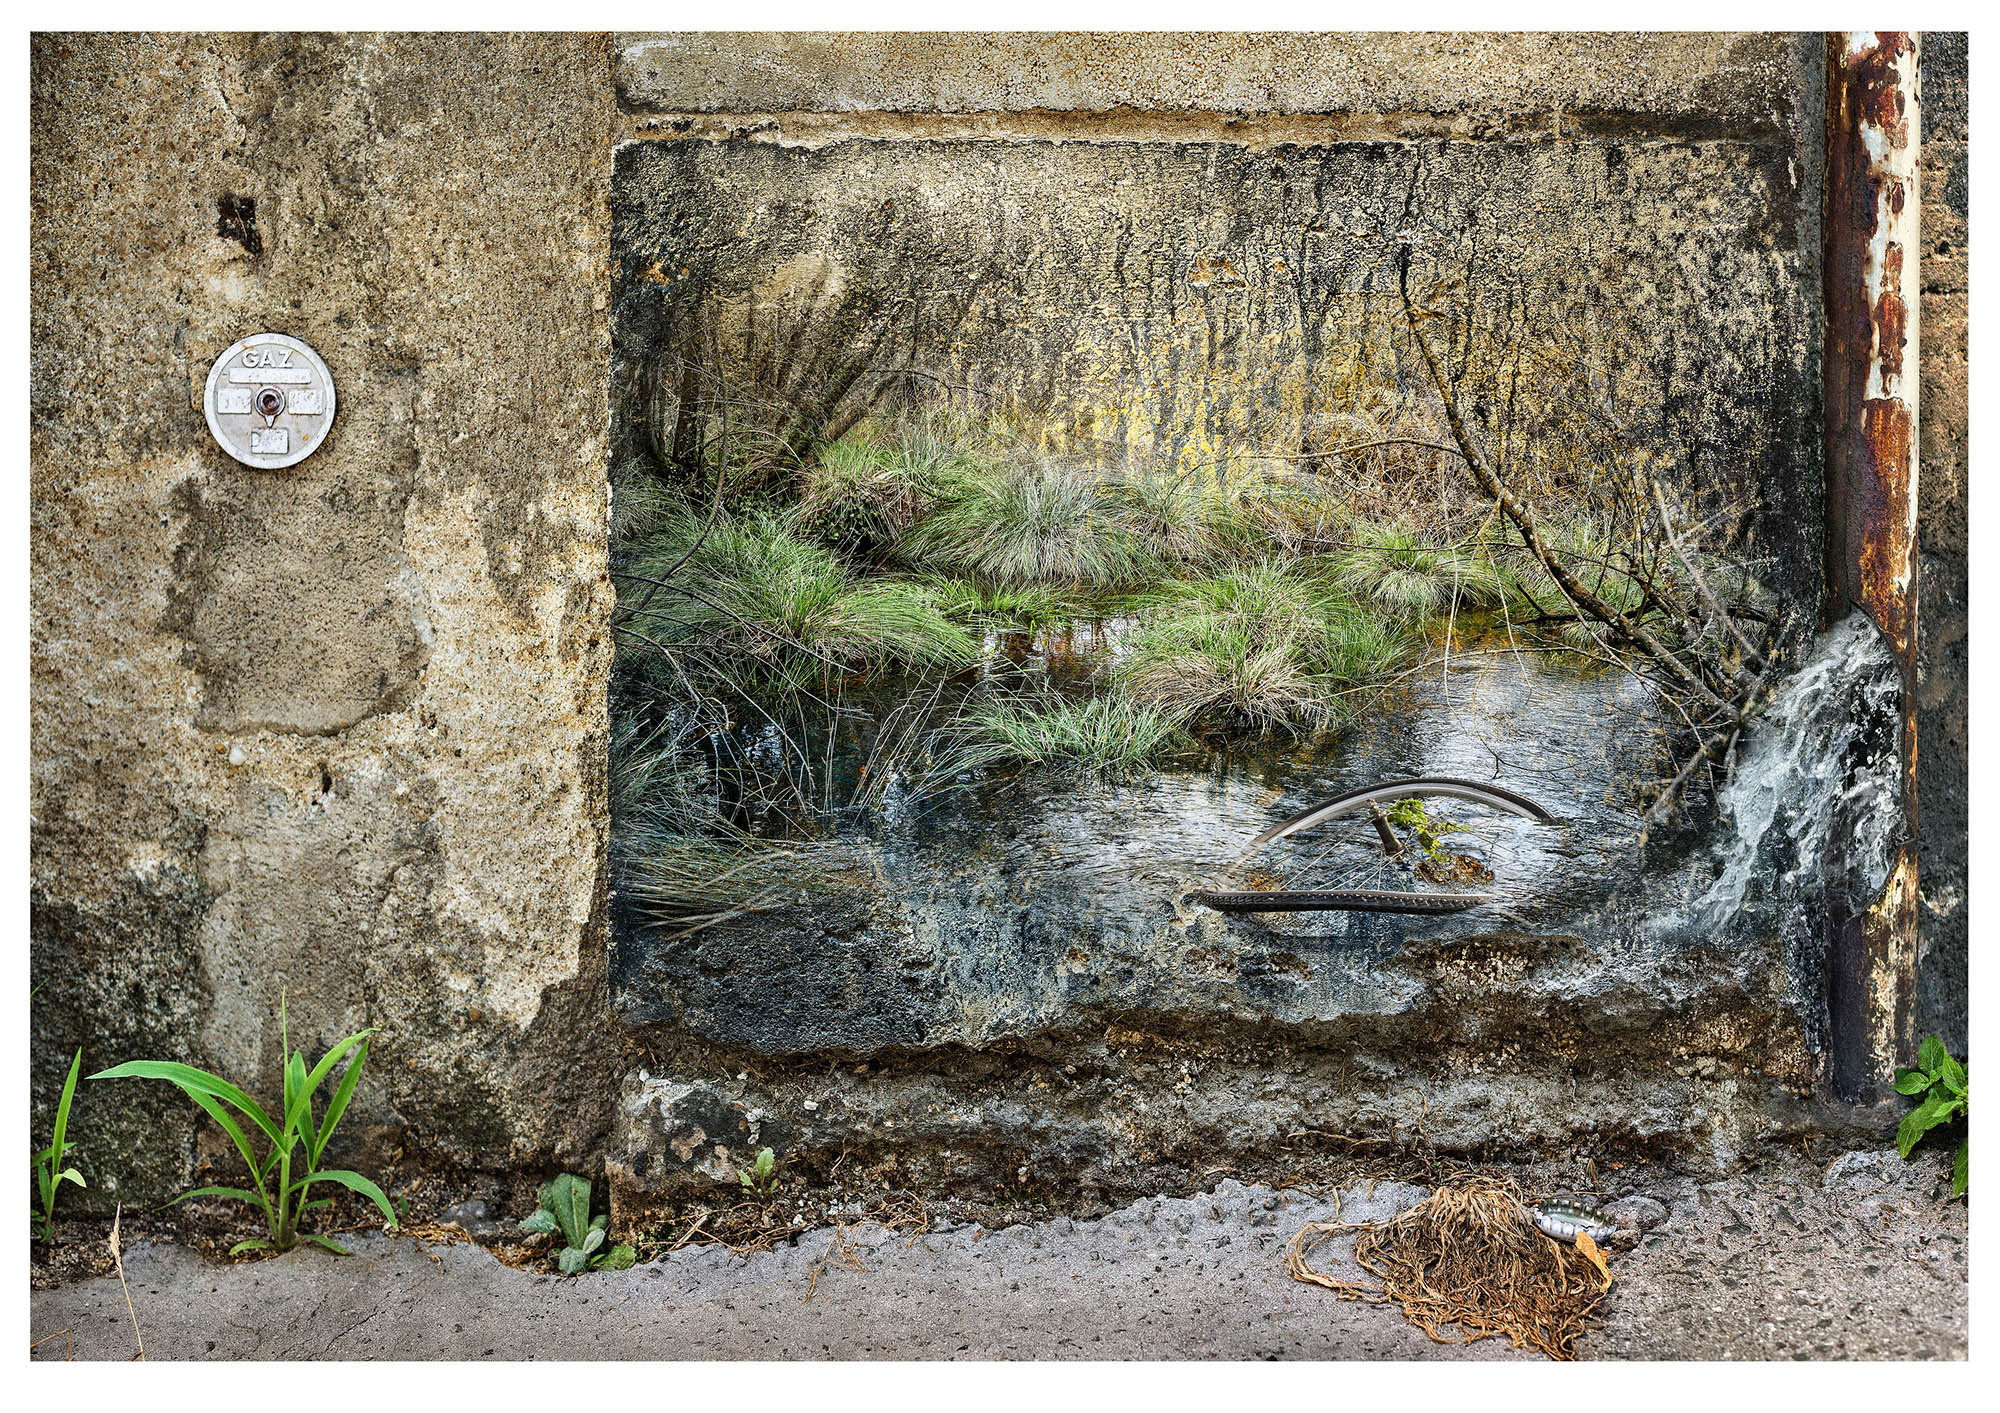 6th composite photograph in series: on a wall a gentle woodland stream scene is superimposed all spoiled by a buckled bicycle wheel discarded in the water